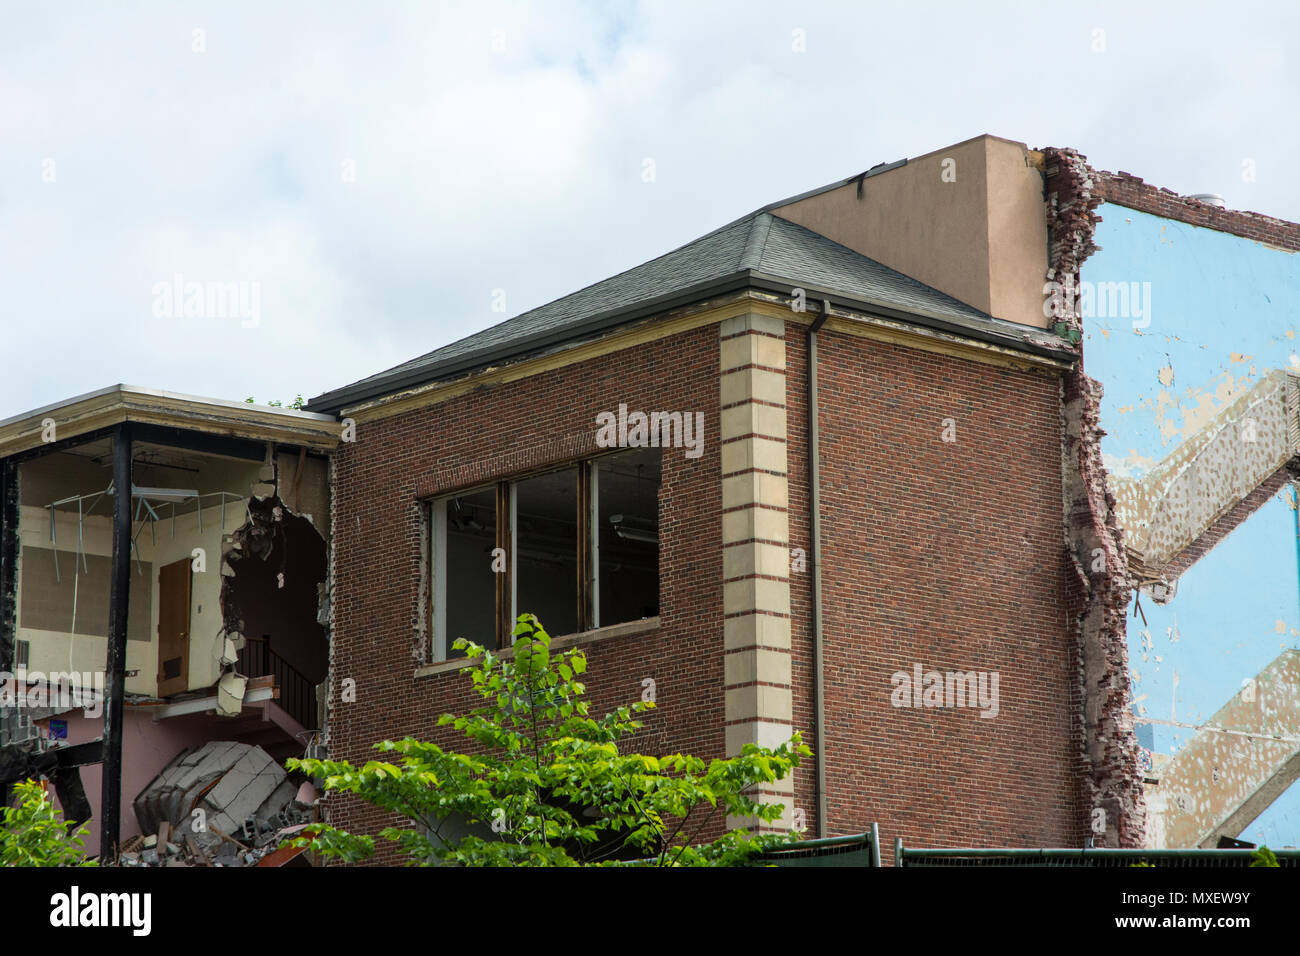 Building was built at the turn of the 19 century and is no longer viable for a useful building. Stock Photo